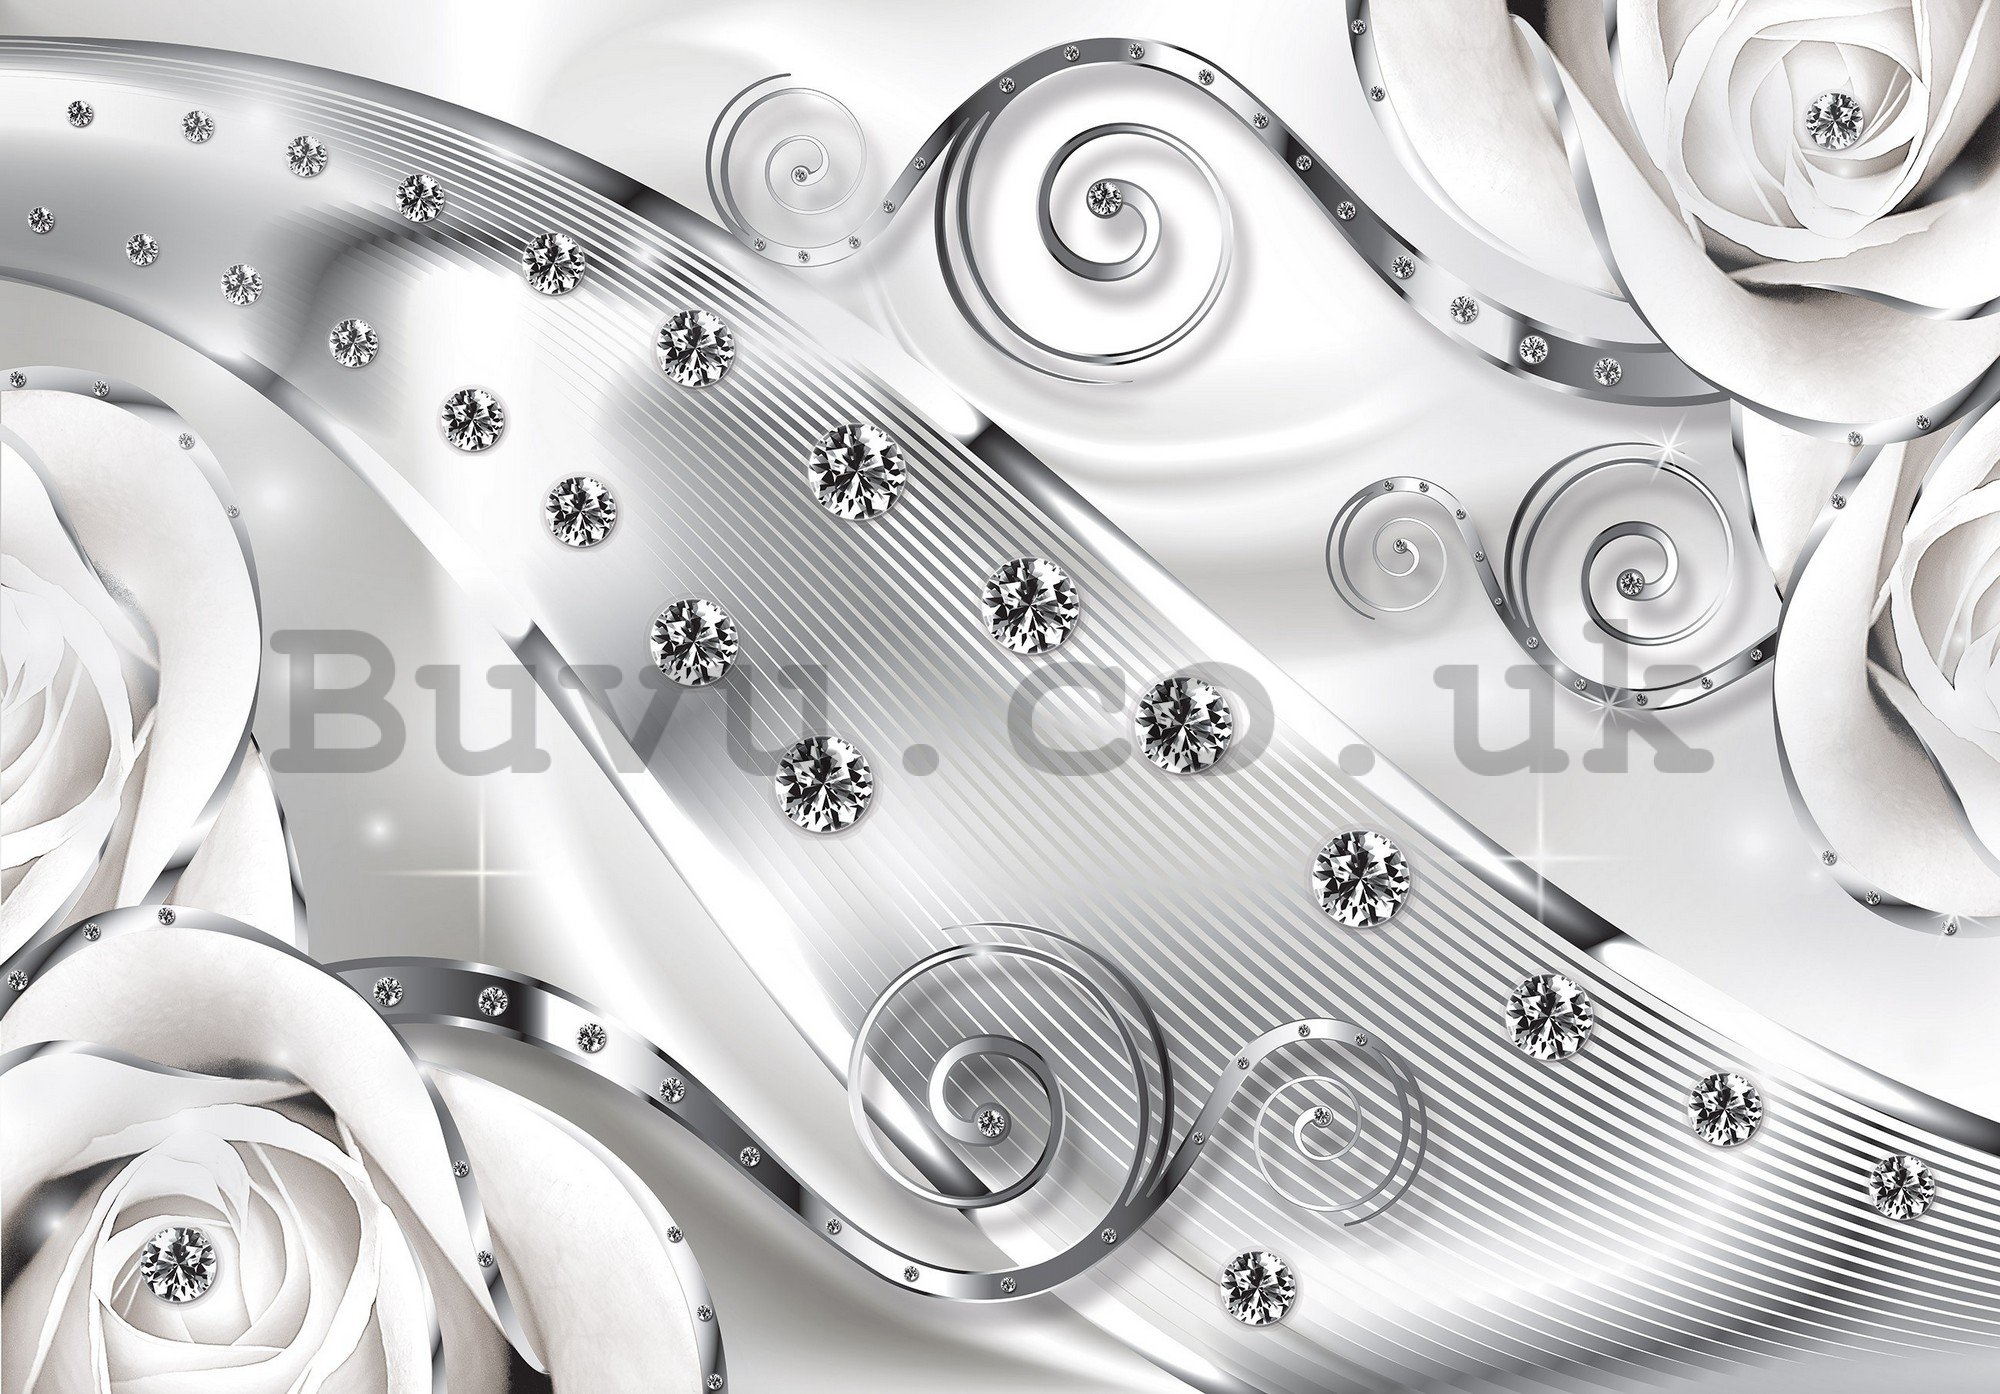 Wall Mural: Luxurious abstraction (silver) - 368x254 cm